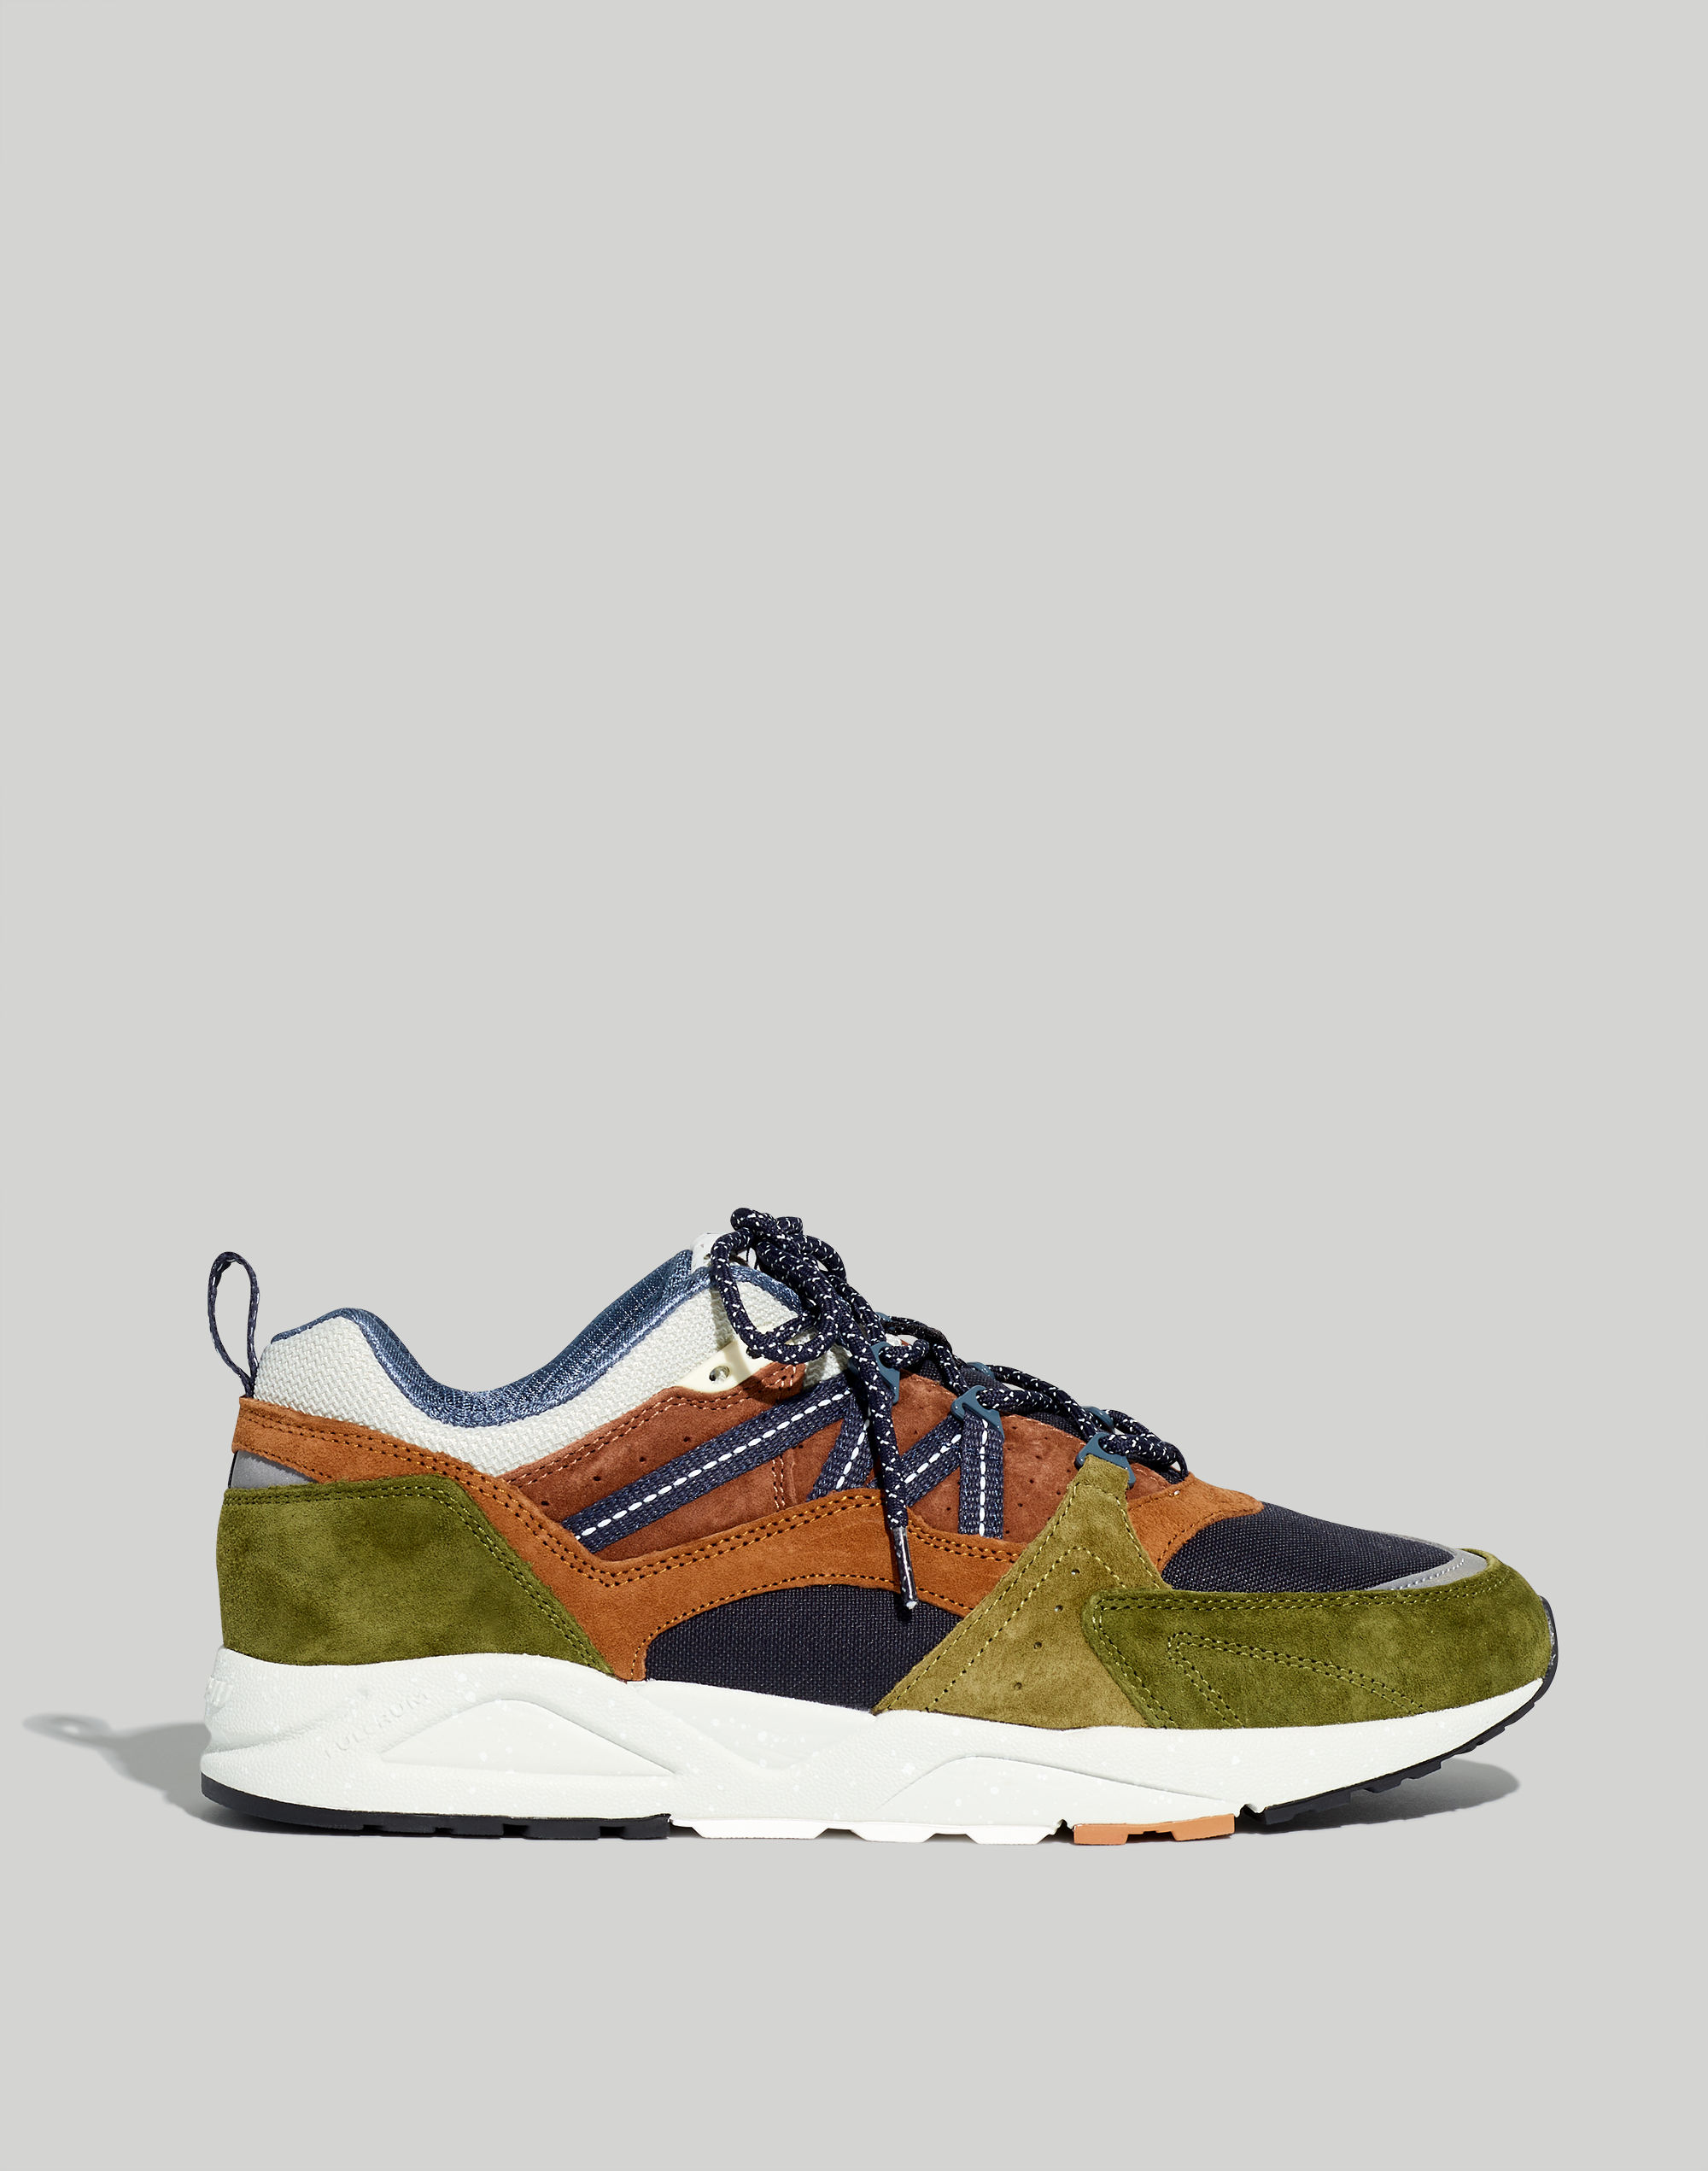 Madewell Karhu Fusion 2.0 Sneakers | The at